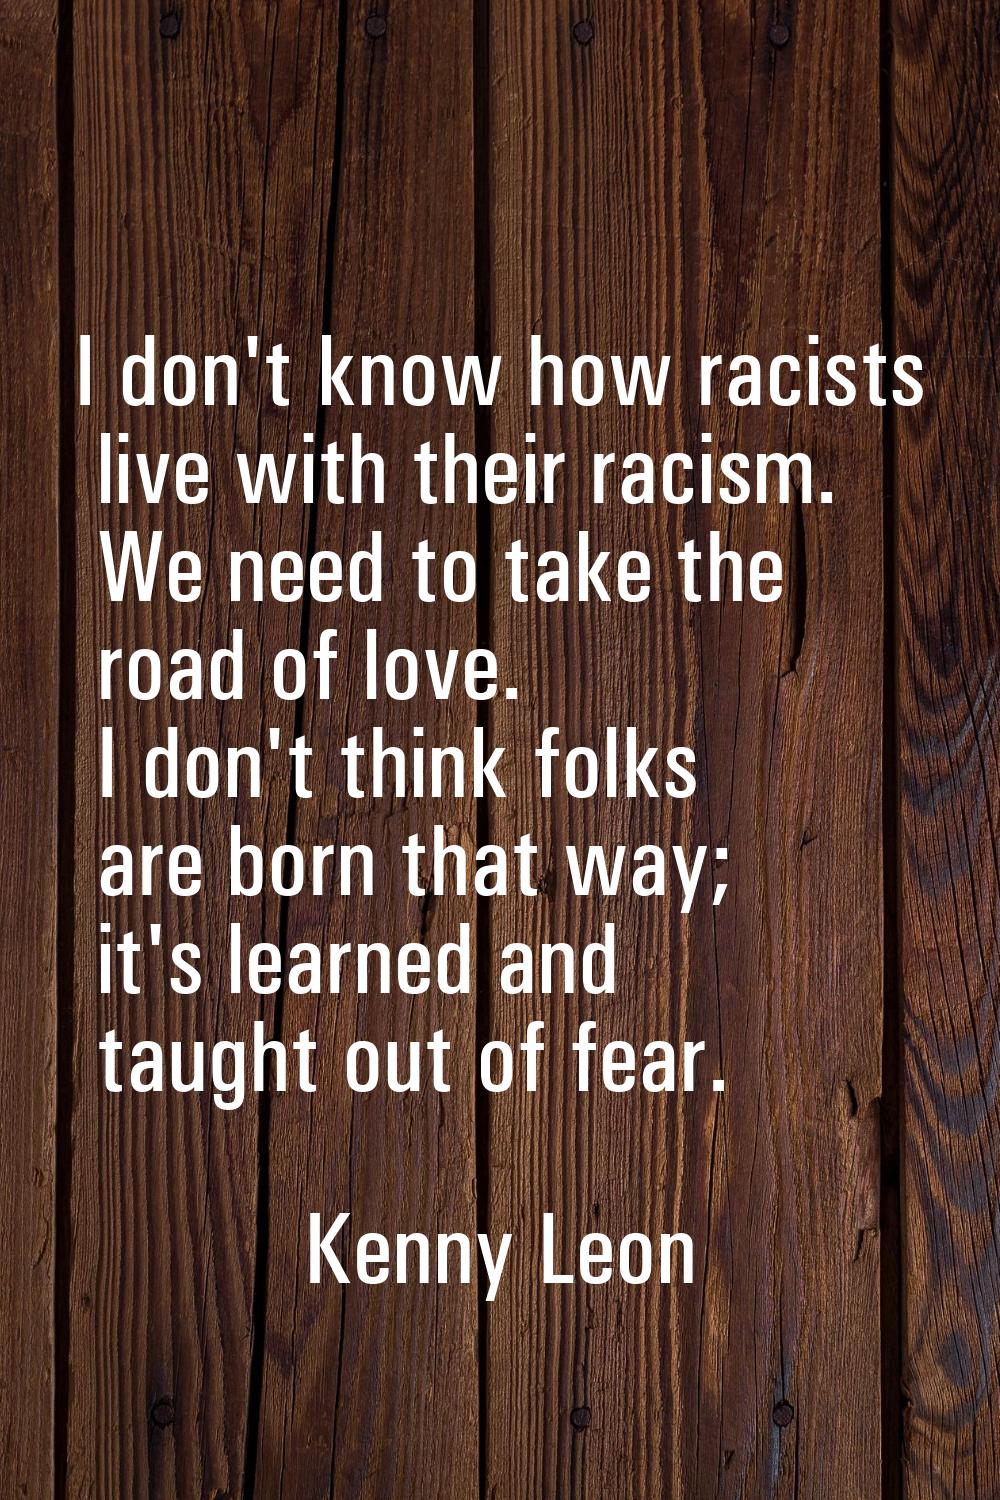 I don't know how racists live with their racism. We need to take the road of love. I don't think fo